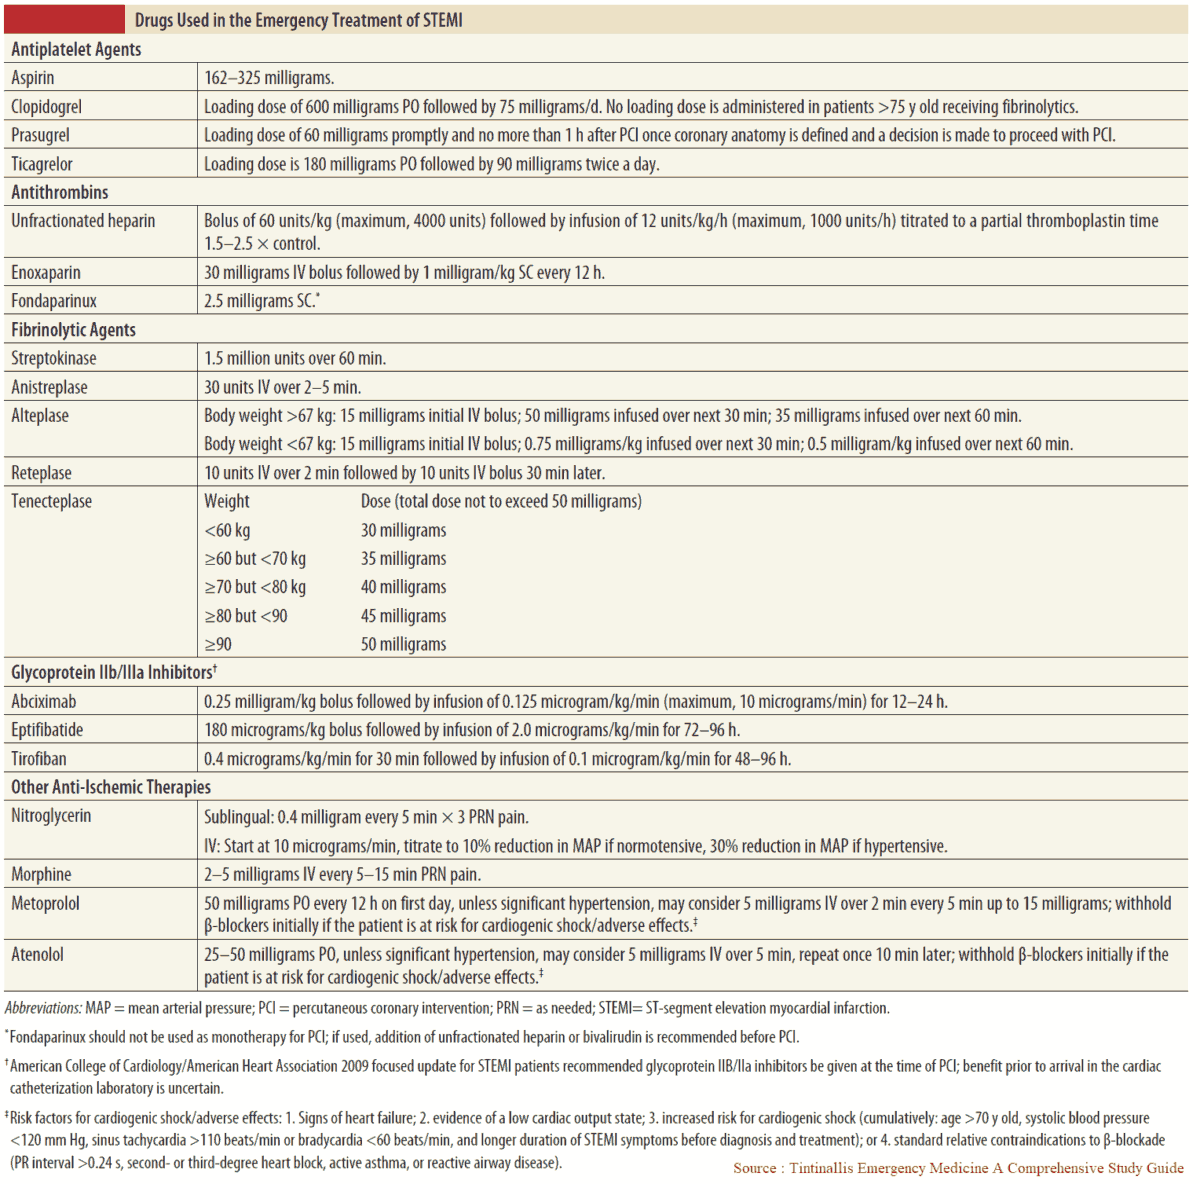 Drugs Used in the Emergency Treatment of STEMI